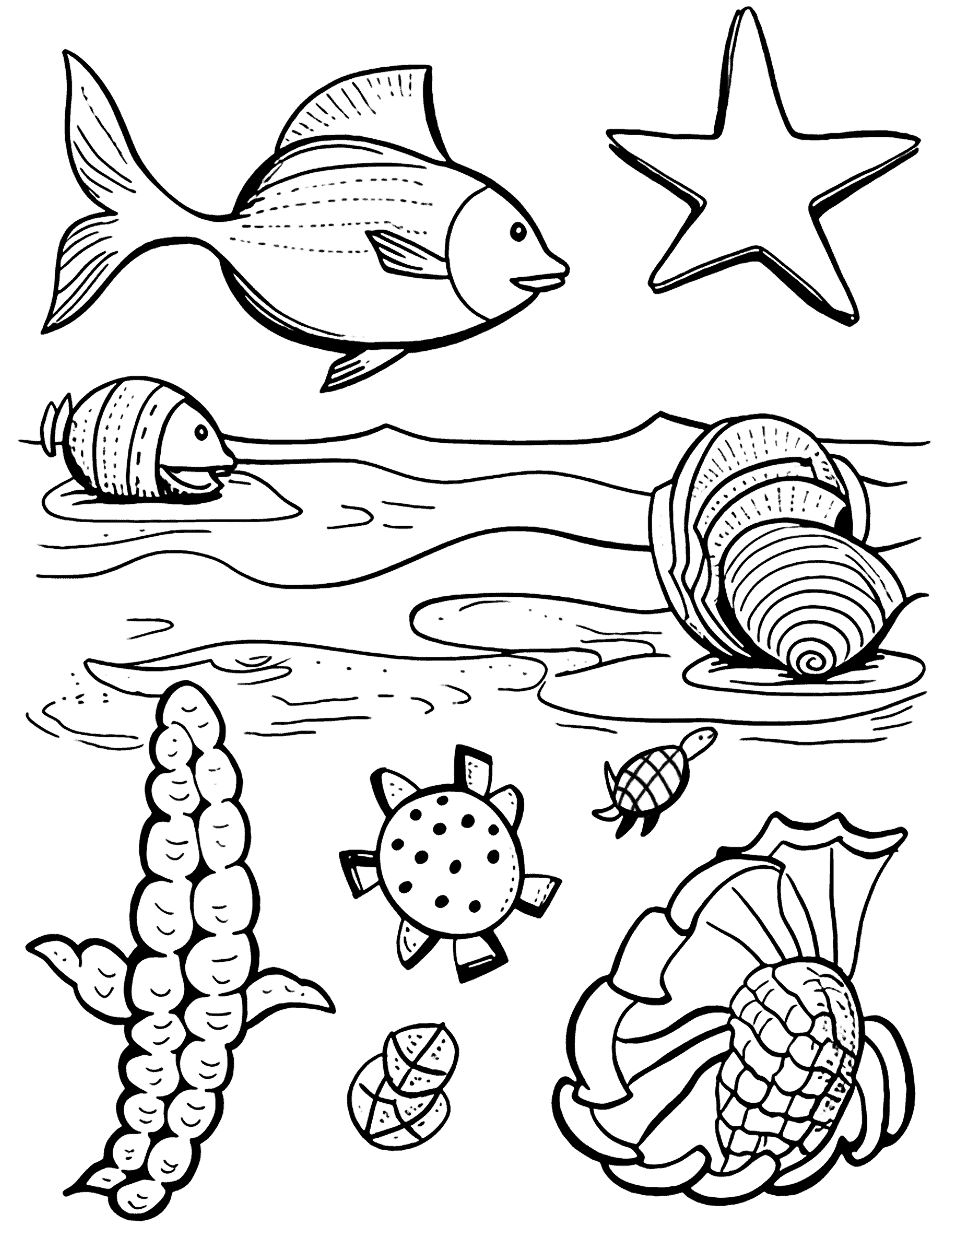 Sea Creature Scavenger Hunt Summer Coloring Page - Discover and color different types of tropical fish, corals, and other sea creatures.